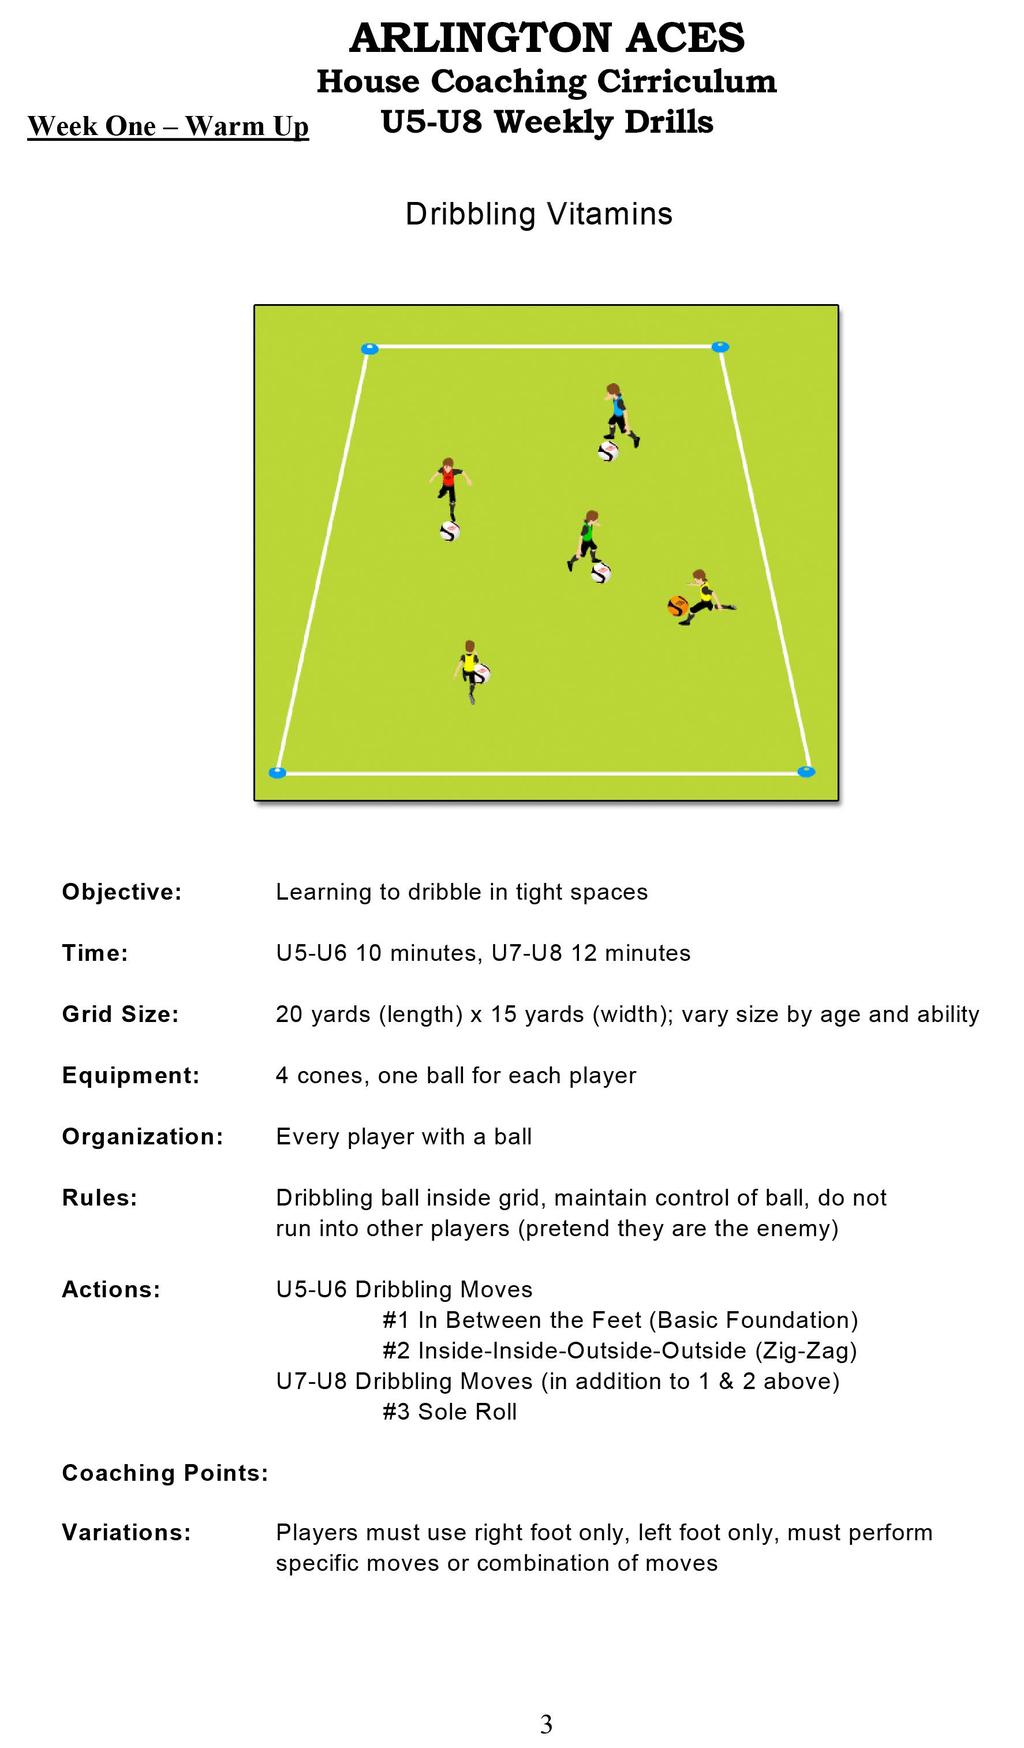 Week Three Warm Up Dribbling Marbles ACTIONS Learning to dribble in tight spaces 20 yards (length) x 15 yards (width); vary size by age and ability 4 cones, one ball for each player Every player with